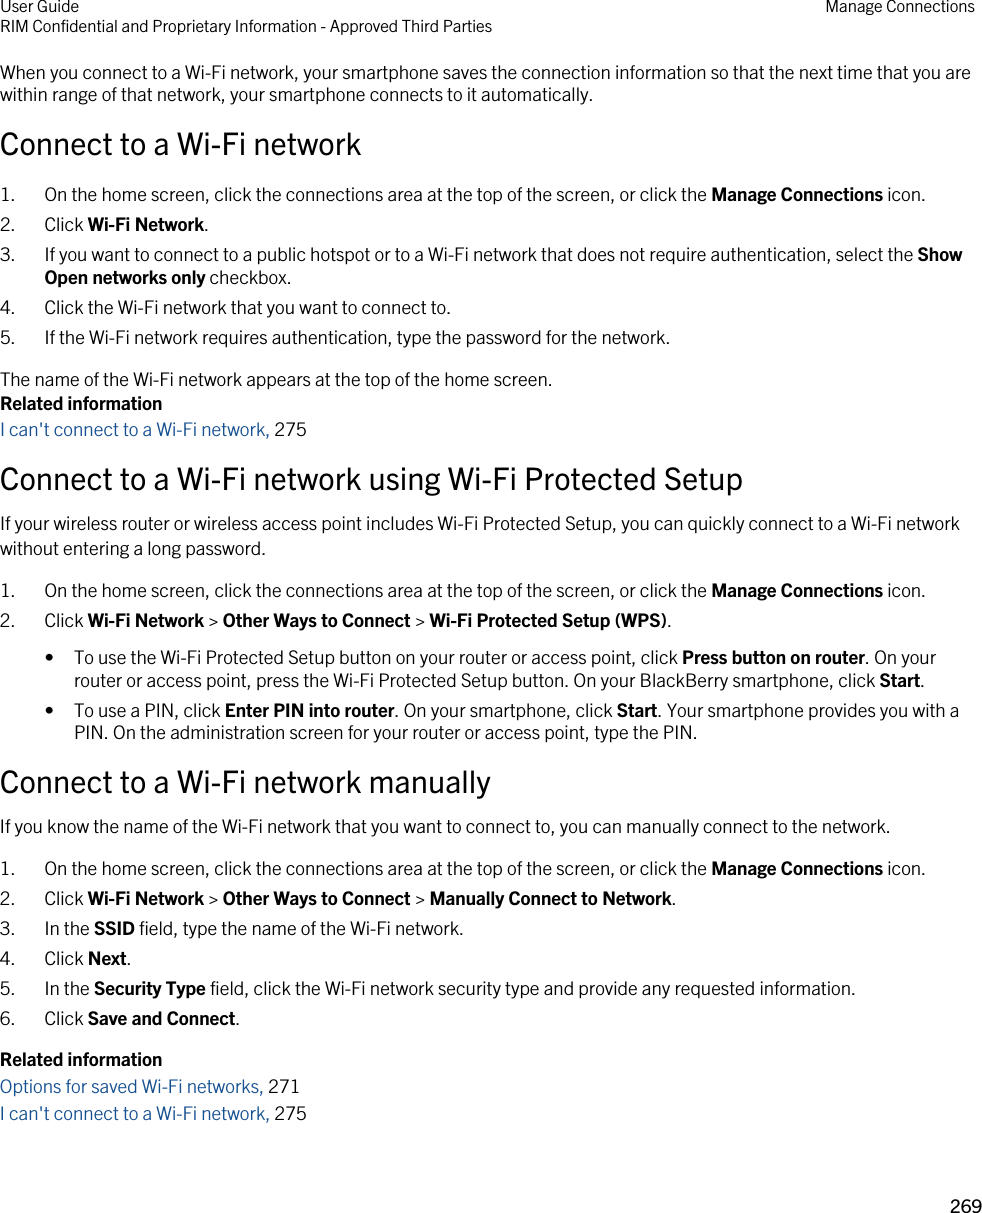 When you connect to a Wi-Fi network, your smartphone saves the connection information so that the next time that you are within range of that network, your smartphone connects to it automatically.Connect to a Wi-Fi network1. On the home screen, click the connections area at the top of the screen, or click the Manage Connections icon.2. Click Wi-Fi Network.3. If you want to connect to a public hotspot or to a Wi-Fi network that does not require authentication, select the Show Open networks only checkbox.4. Click the Wi-Fi network that you want to connect to.5. If the Wi-Fi network requires authentication, type the password for the network.The name of the Wi-Fi network appears at the top of the home screen.Related informationI can&apos;t connect to a Wi-Fi network, 275Connect to a Wi-Fi network using Wi-Fi Protected SetupIf your wireless router or wireless access point includes Wi-Fi Protected Setup, you can quickly connect to a Wi-Fi network without entering a long password.1. On the home screen, click the connections area at the top of the screen, or click the Manage Connections icon.2. Click Wi-Fi Network &gt; Other Ways to Connect &gt; Wi-Fi Protected Setup (WPS).• To use the Wi-Fi Protected Setup button on your router or access point, click Press button on router. On your router or access point, press the Wi-Fi Protected Setup button. On your BlackBerry smartphone, click Start.• To use a PIN, click Enter PIN into router. On your smartphone, click Start. Your smartphone provides you with a PIN. On the administration screen for your router or access point, type the PIN.Connect to a Wi-Fi network manuallyIf you know the name of the Wi-Fi network that you want to connect to, you can manually connect to the network.1. On the home screen, click the connections area at the top of the screen, or click the Manage Connections icon.2. Click Wi-Fi Network &gt; Other Ways to Connect &gt; Manually Connect to Network.3. In the SSID field, type the name of the Wi-Fi network.4. Click Next.5. In the Security Type field, click the Wi-Fi network security type and provide any requested information.6. Click Save and Connect.Related informationOptions for saved Wi-Fi networks, 271I can&apos;t connect to a Wi-Fi network, 275User GuideRIM Confidential and Proprietary Information - Approved Third Parties Manage Connections269 